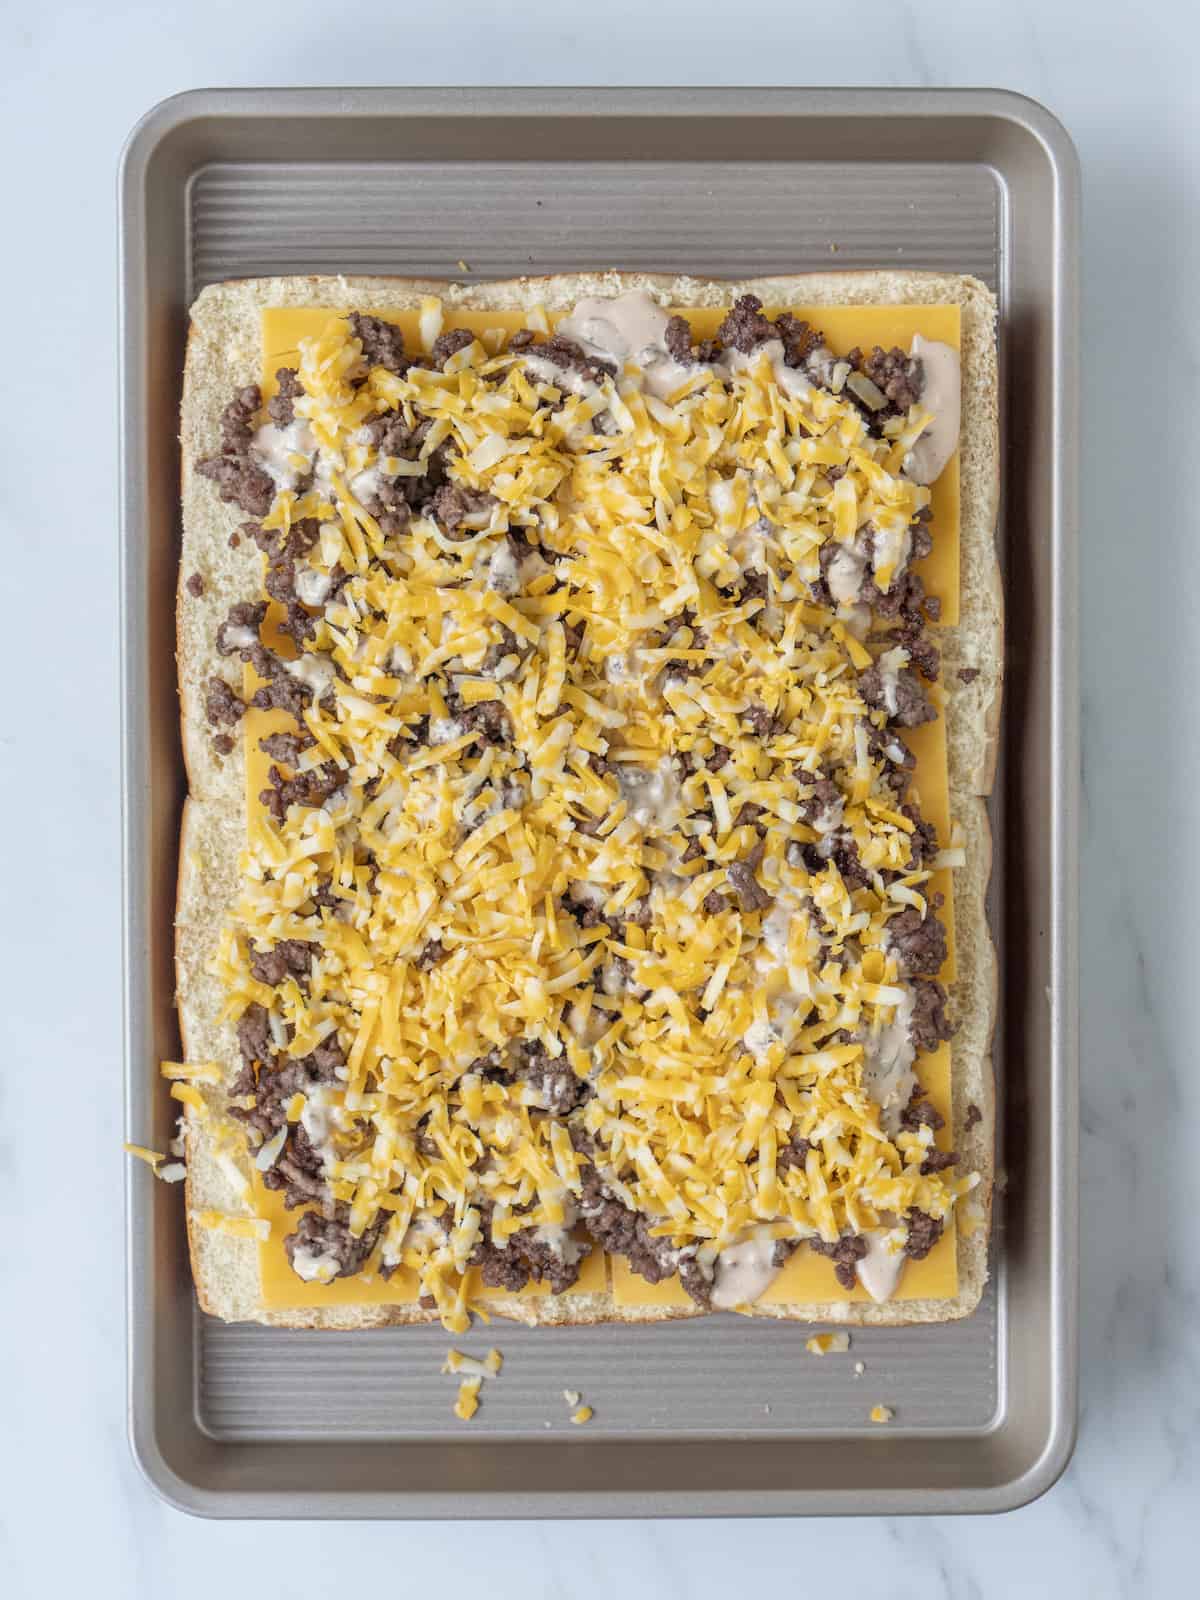 A baking sheet with a 3x4 grid of bottom half of slider buns topped with slices of cheddar cheese, ground beef, sauce and shredded cheese.